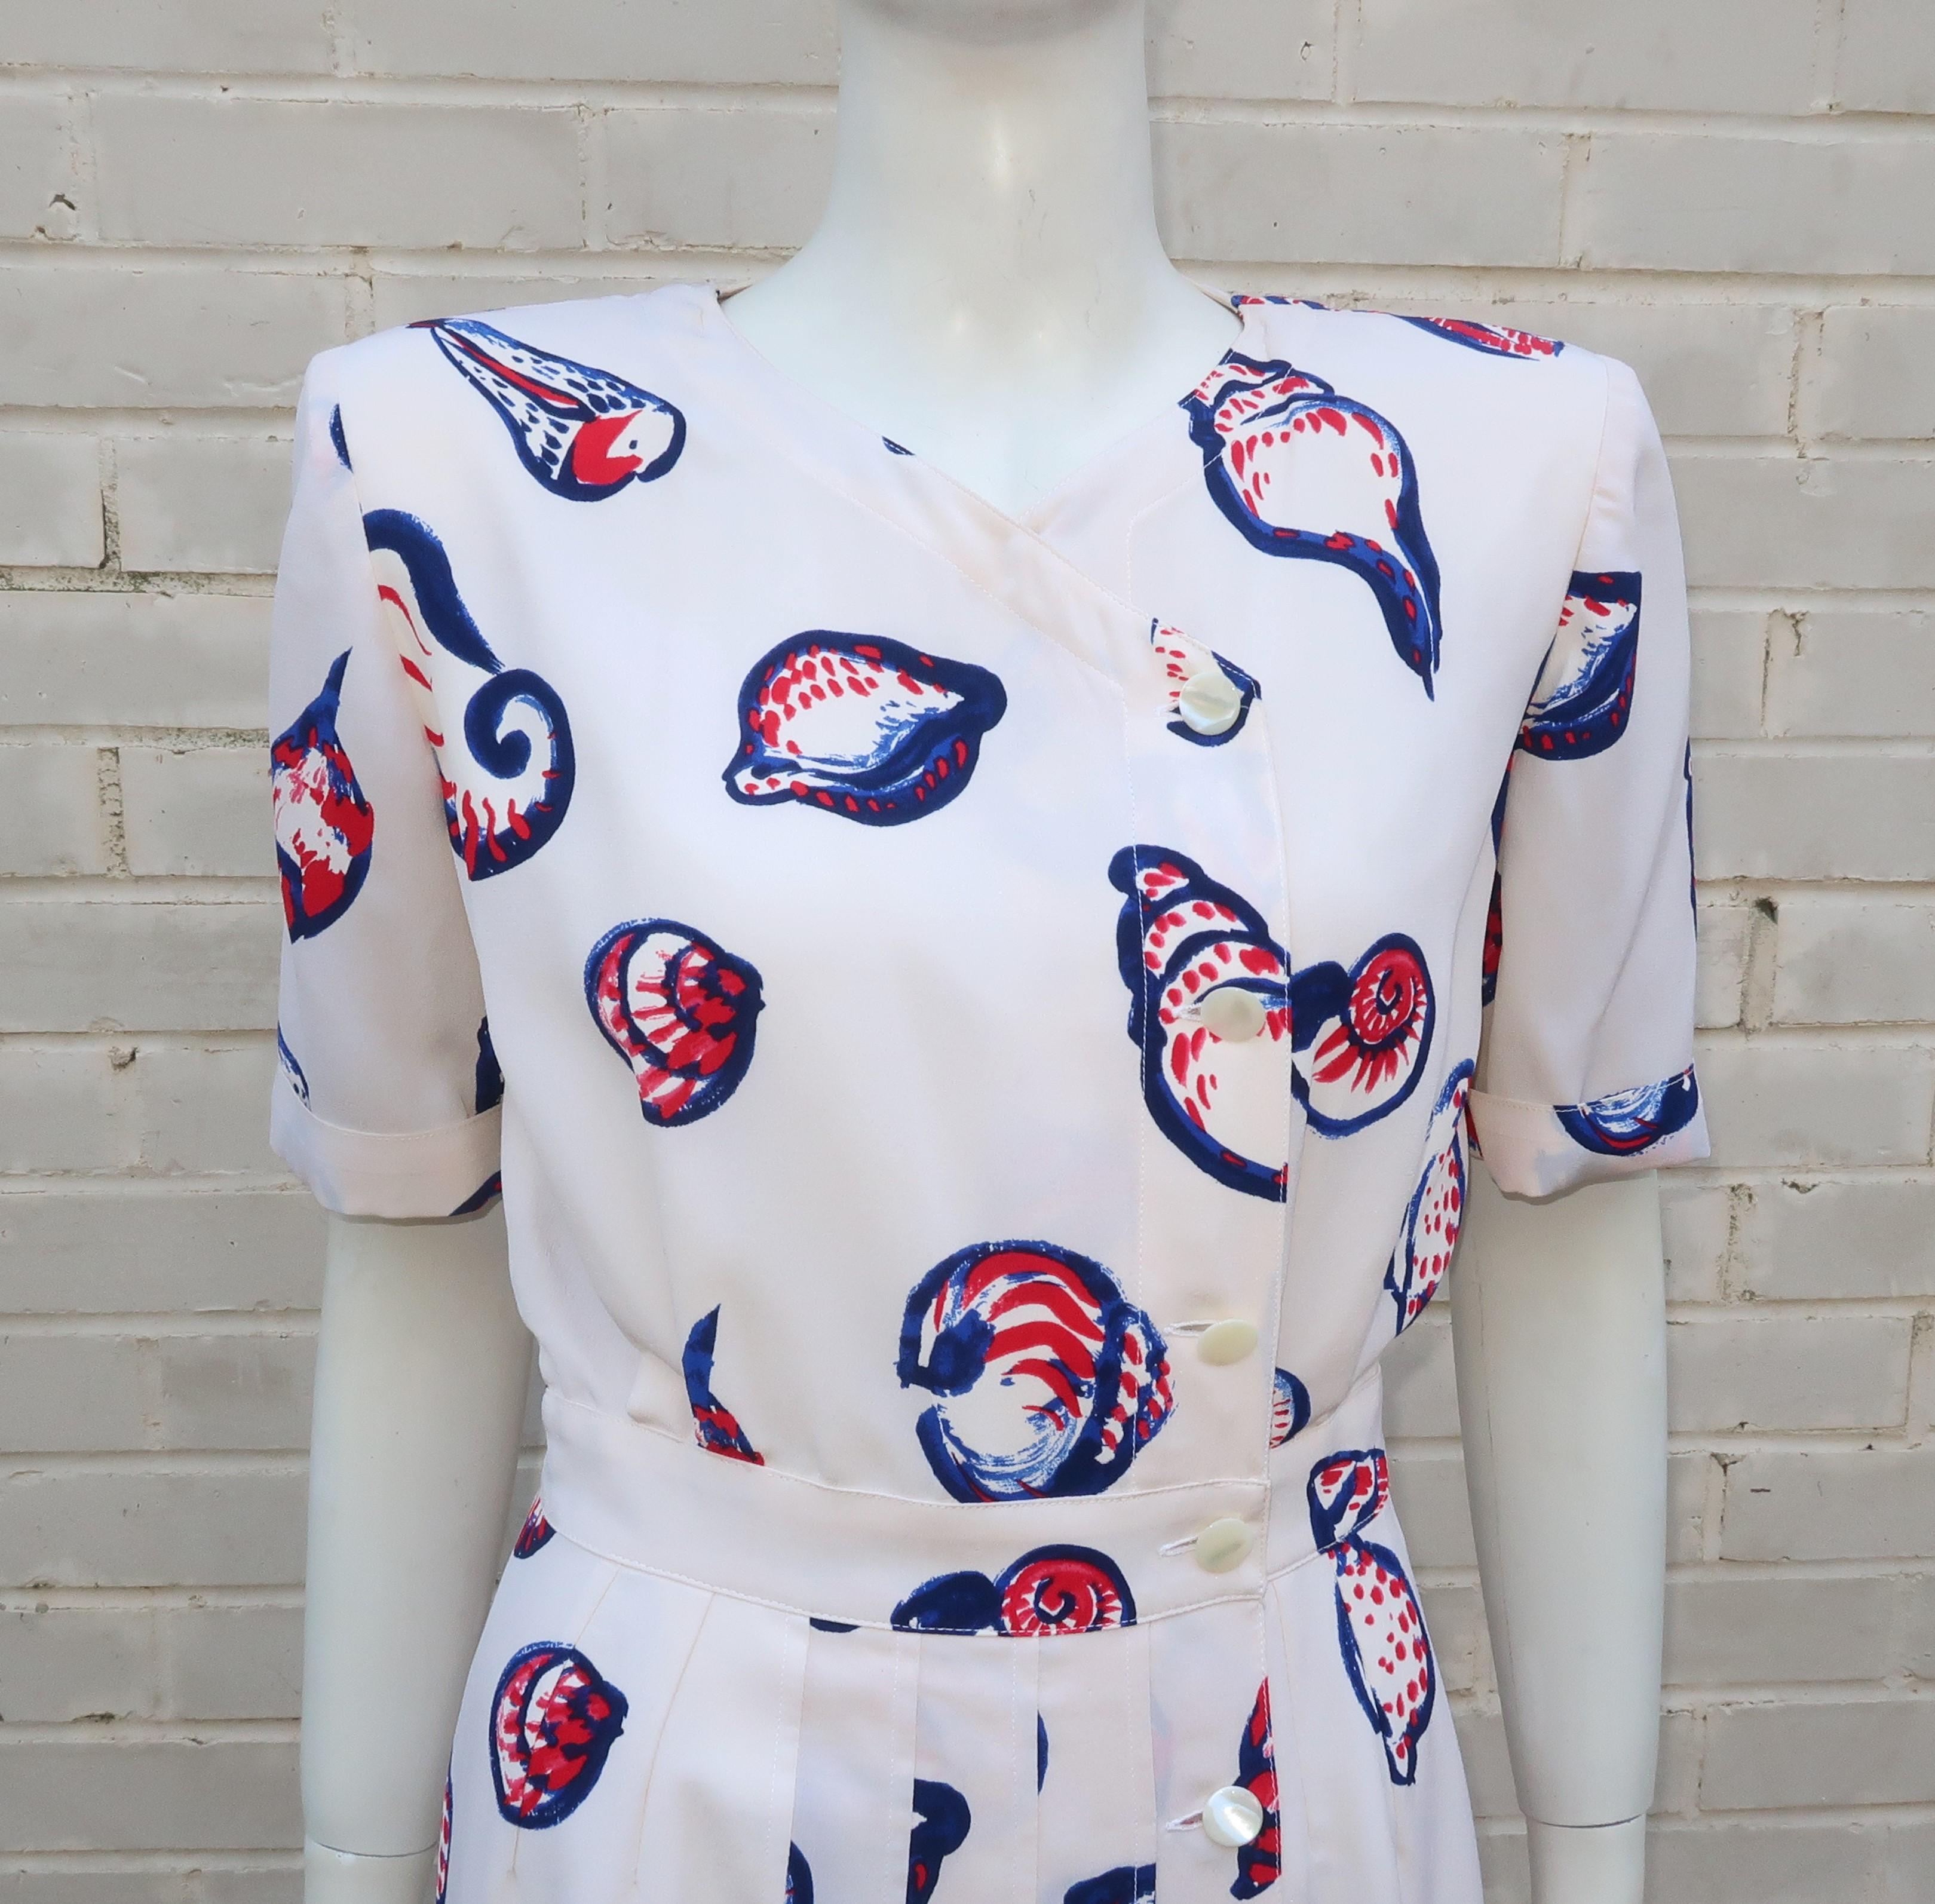 Emanuel Ungaro combines a ladylike silhouette and a nautical silk fabric printed with red, white and blue sea shells to create a 1980's design with a 1940's inspiration.  The dress asymmetrically closes down the front with mother-of-pearl buttons, a